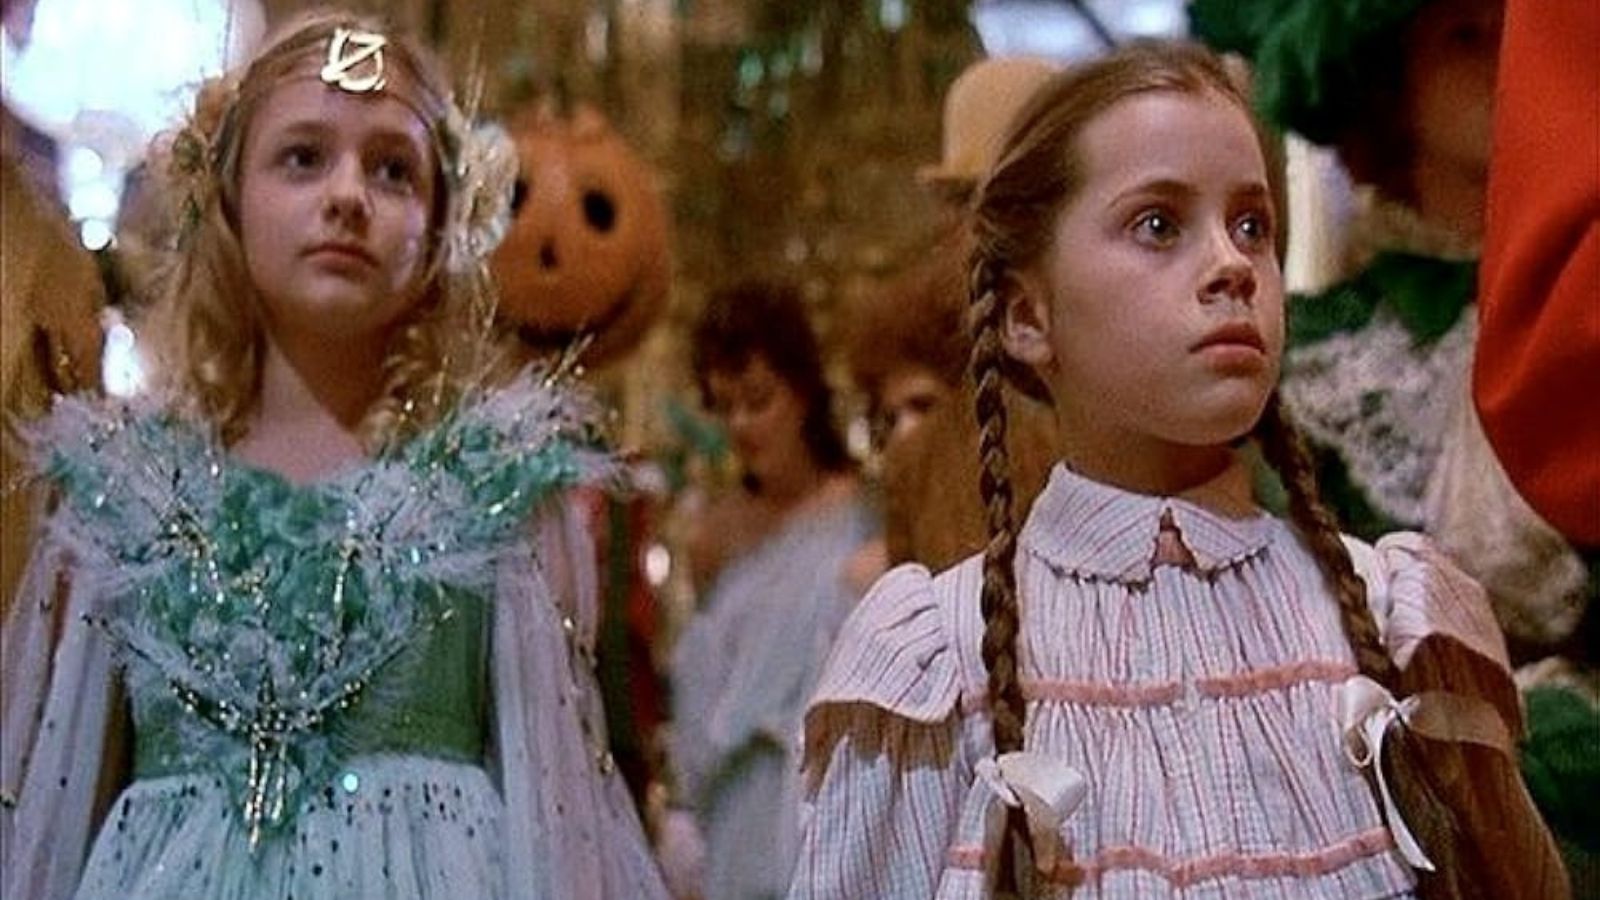 <p>In Return to Oz, we return with Dorothy to the magical land. However, this time around, Oz is a far darker and more sinister place. The creepy characters, like the Wheelers and Princess Mombi with her collection of heads, were enough to give us nightmares.</p>